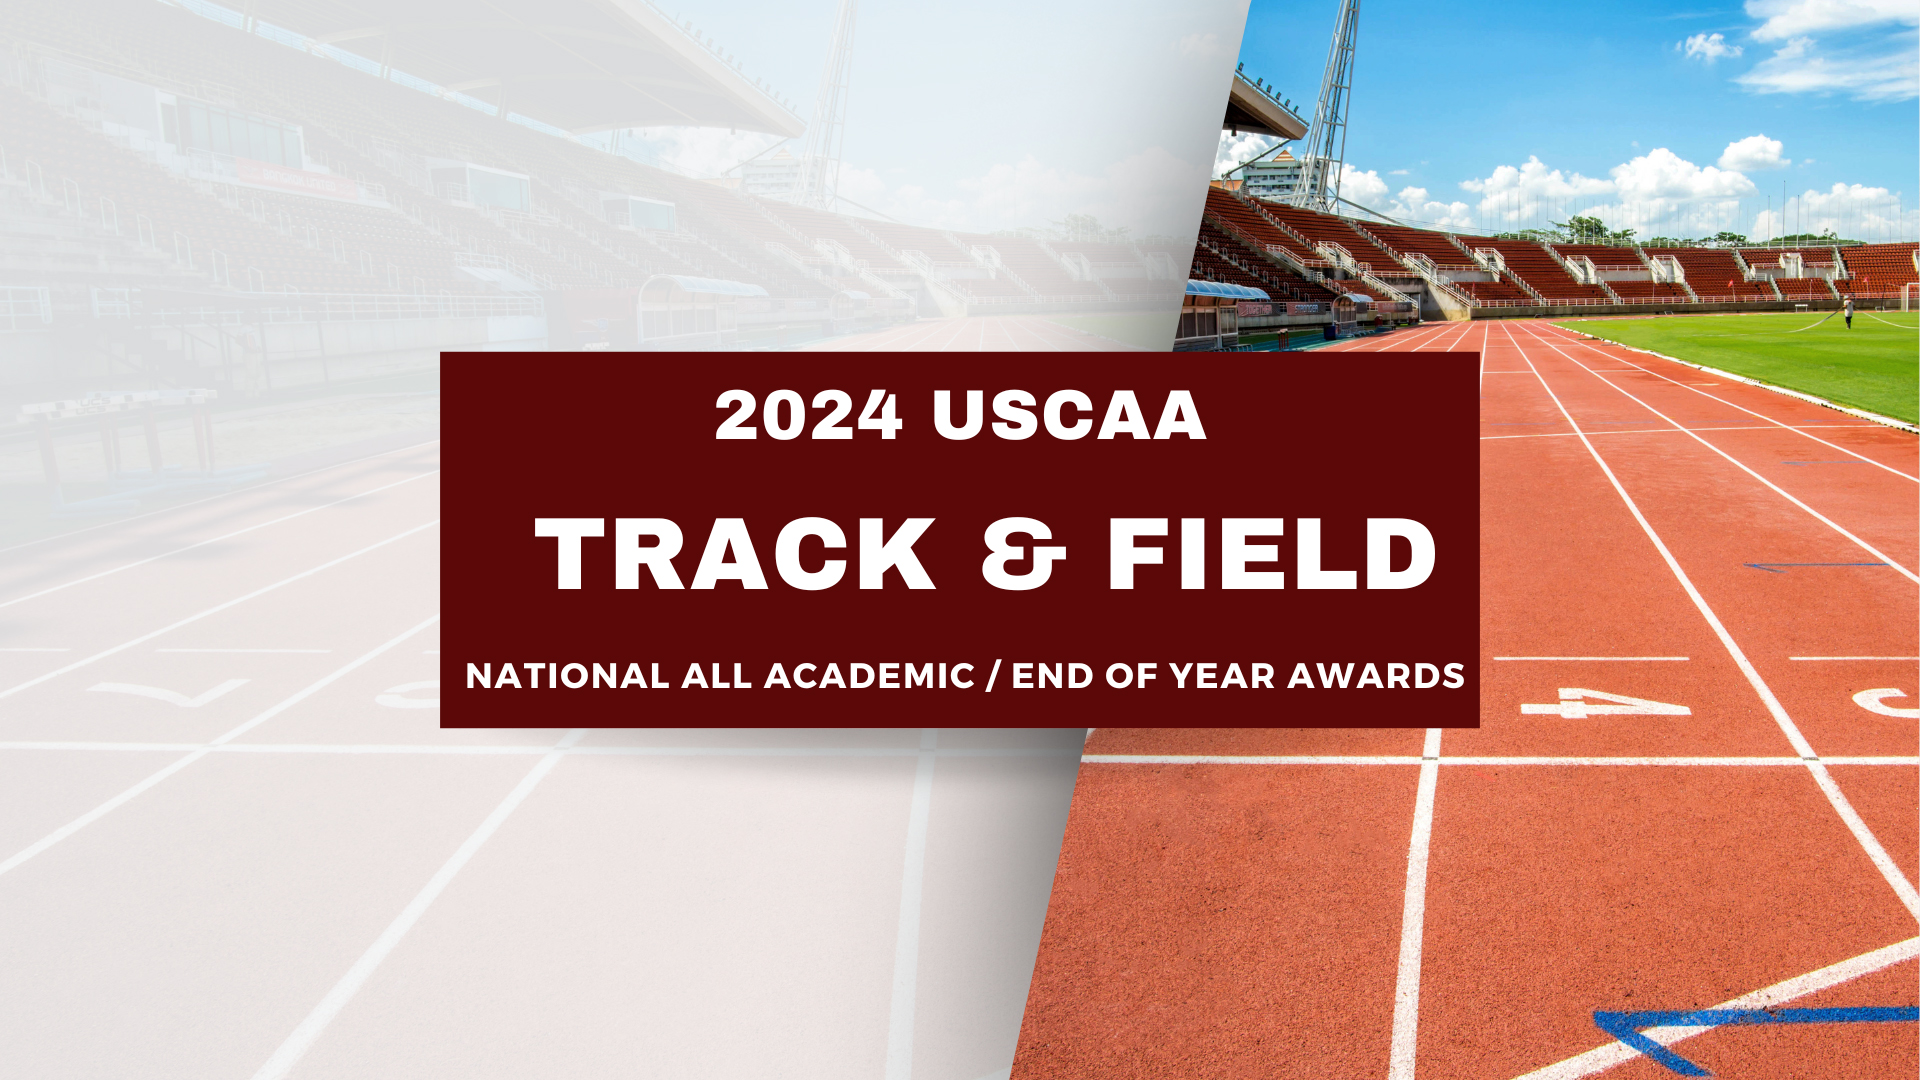 Graphic courtesy of the USCAA.